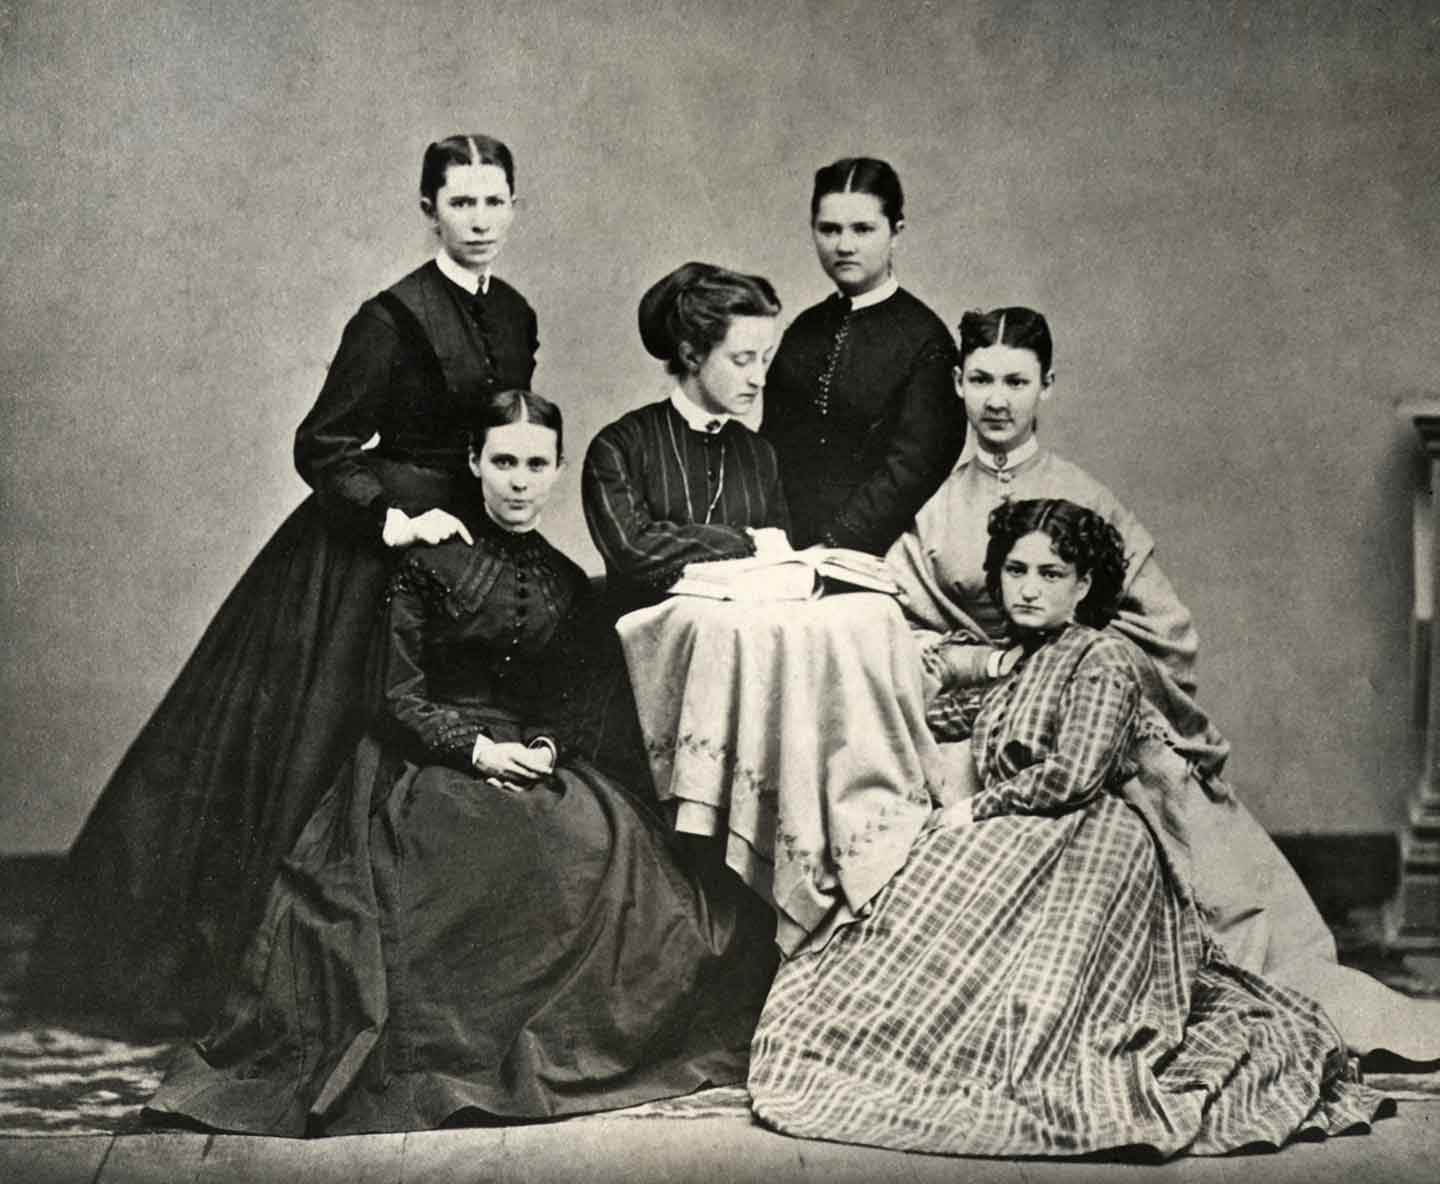 A black and white 19th-century photo of several young people wearing formal dresses.